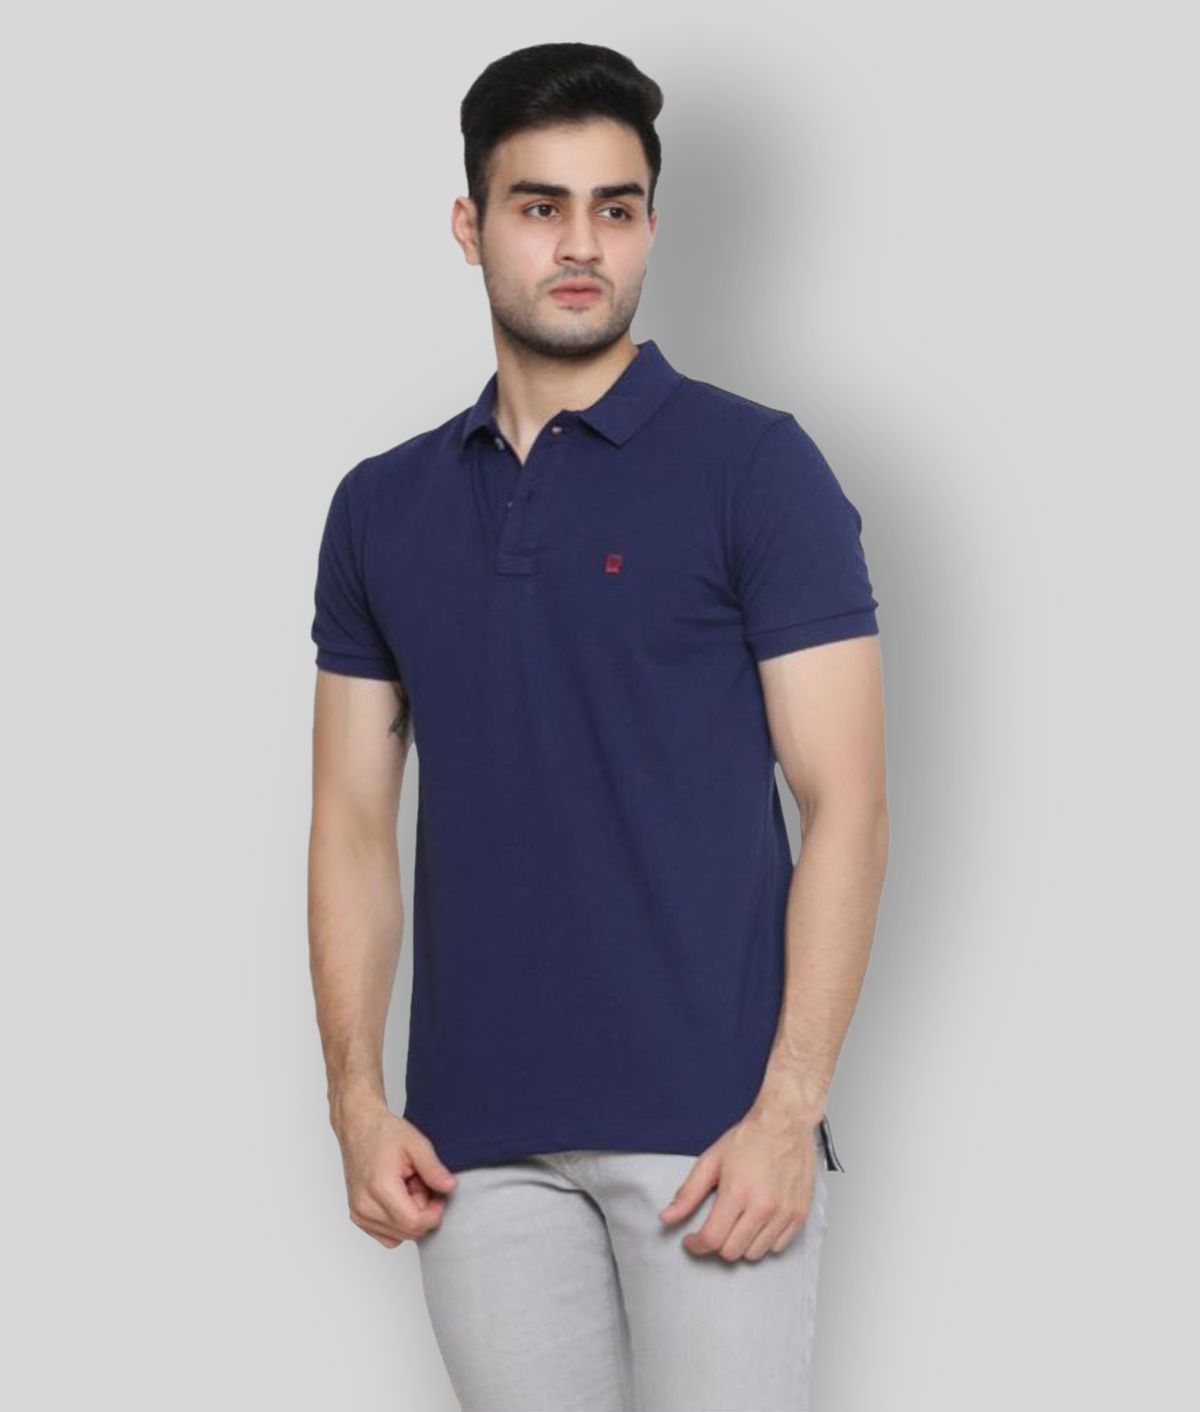     			GENTINO - Navy Cotton Blend Regular Fit Men's Polo T Shirt ( Pack of 1 )